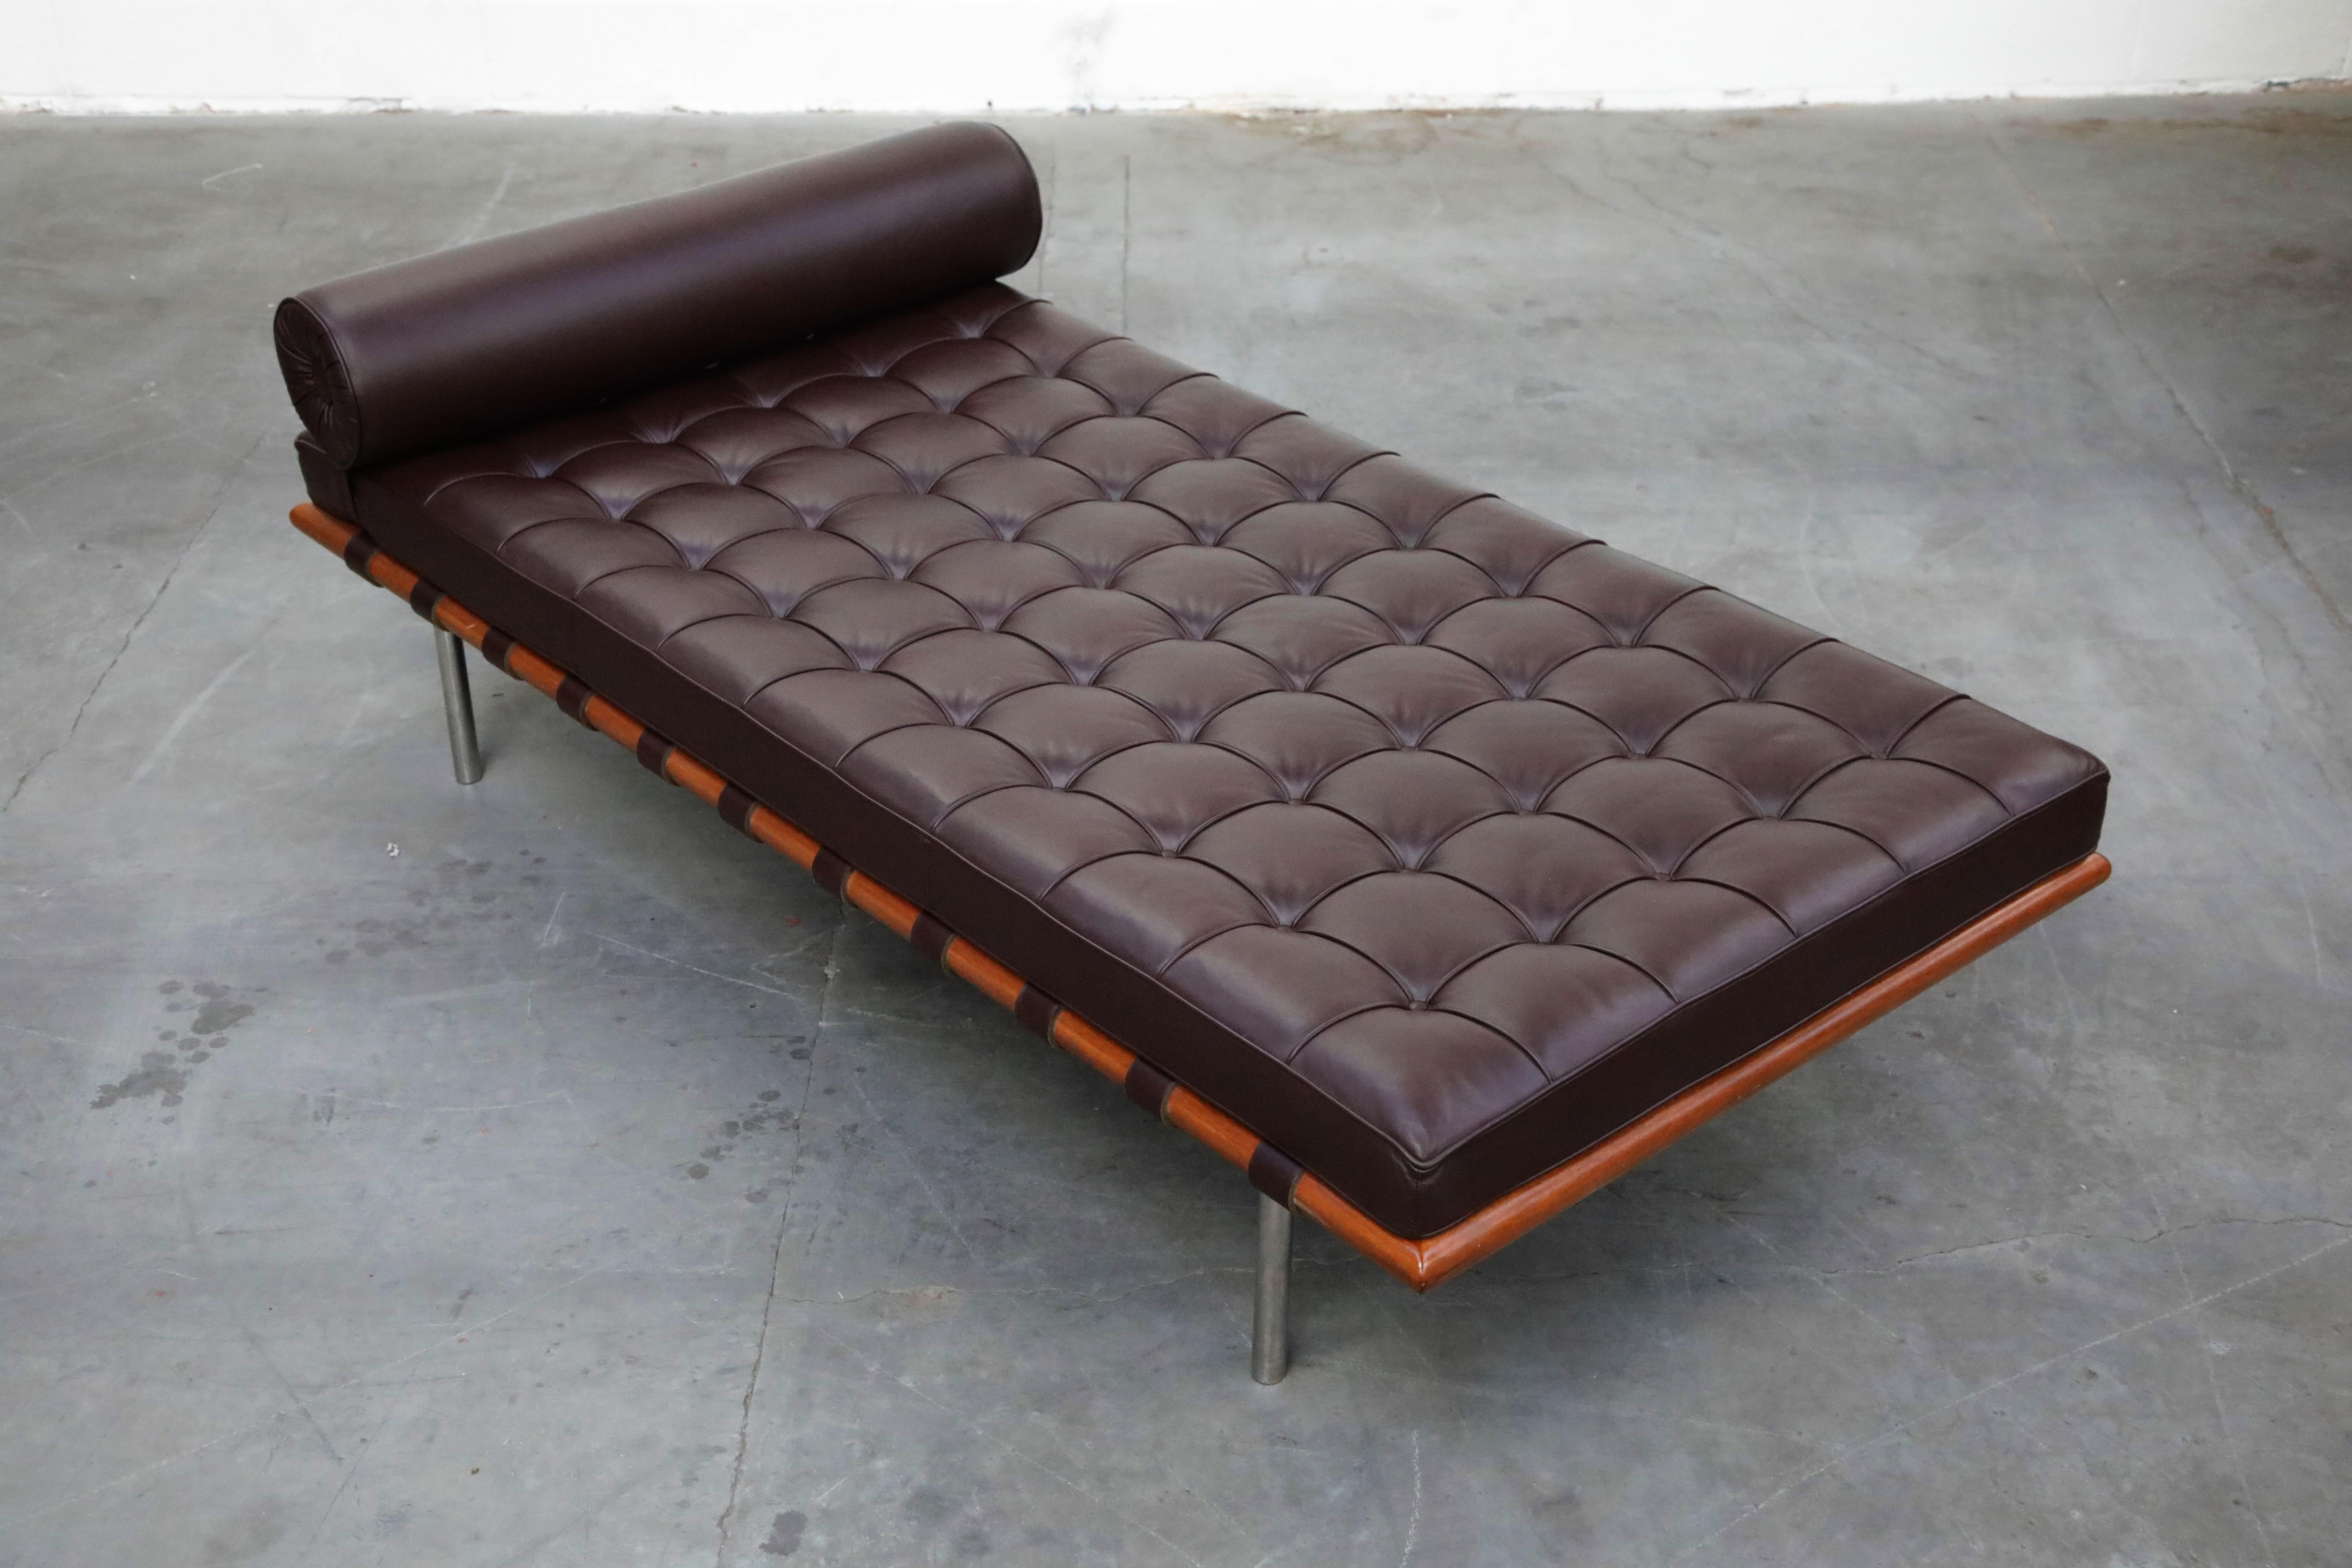 American Barcelona Daybed by Mies Van Der Rohe for Knoll in Dark Brown Leather, Signed